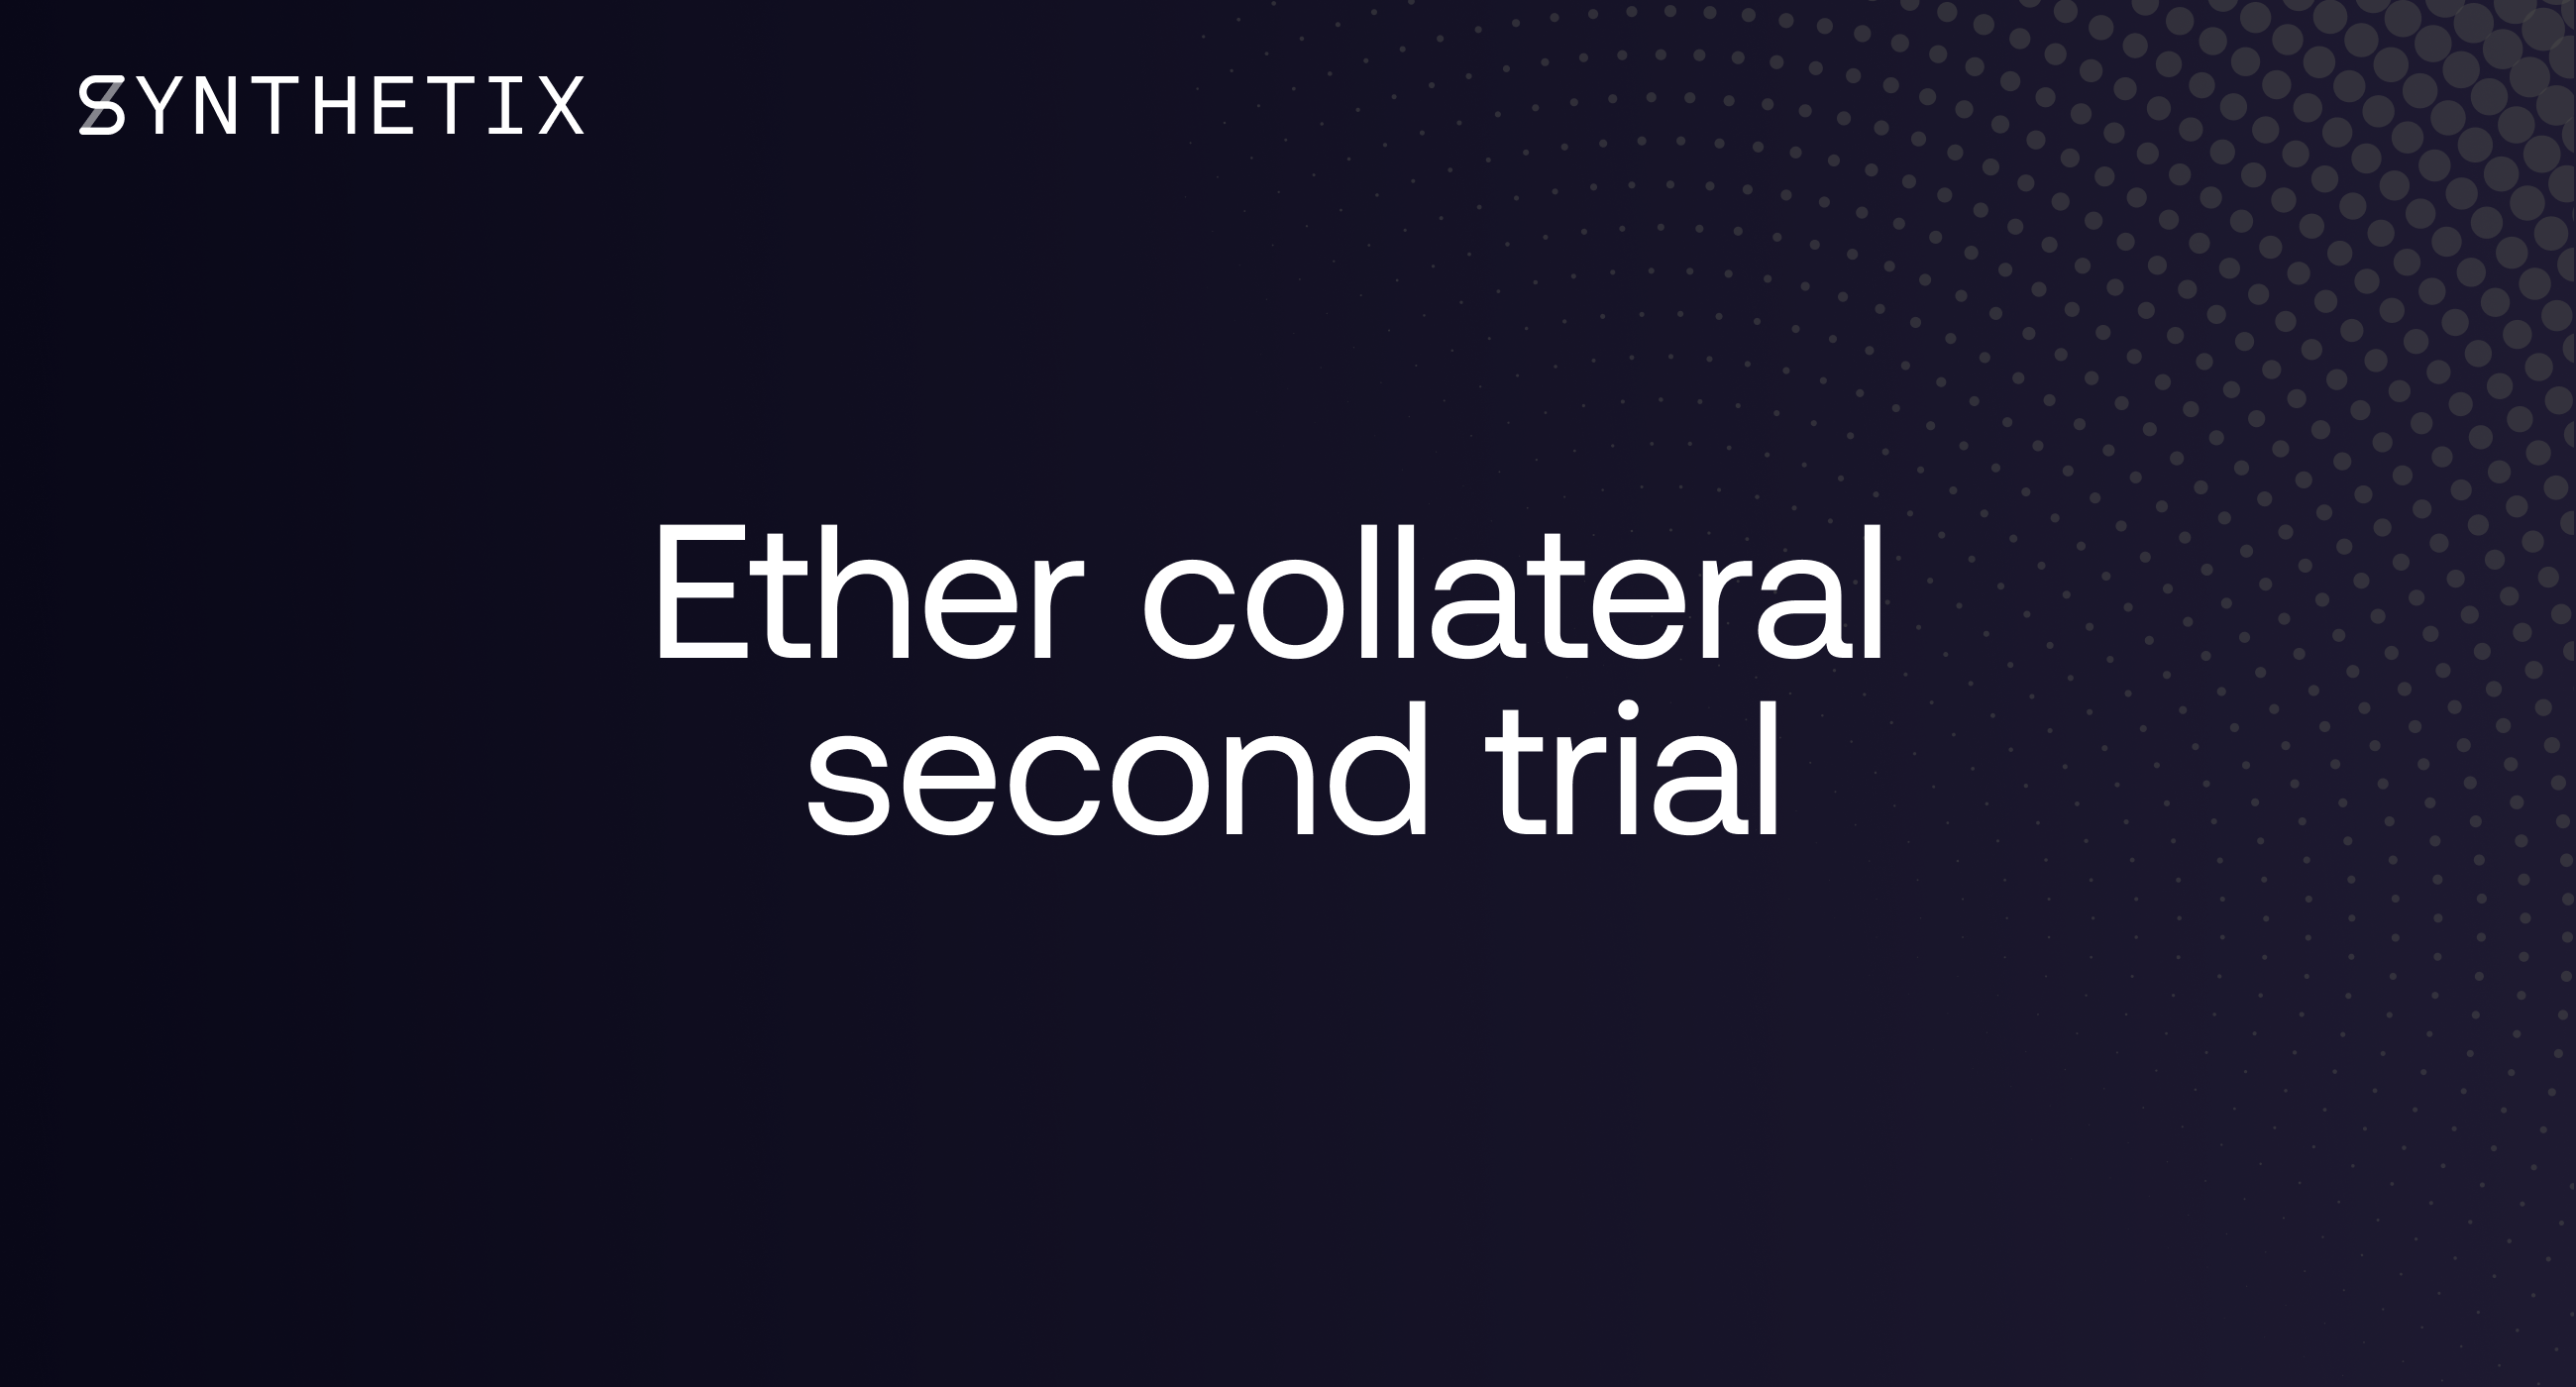 Everything you need to know before participating in the second Ether collateral trial